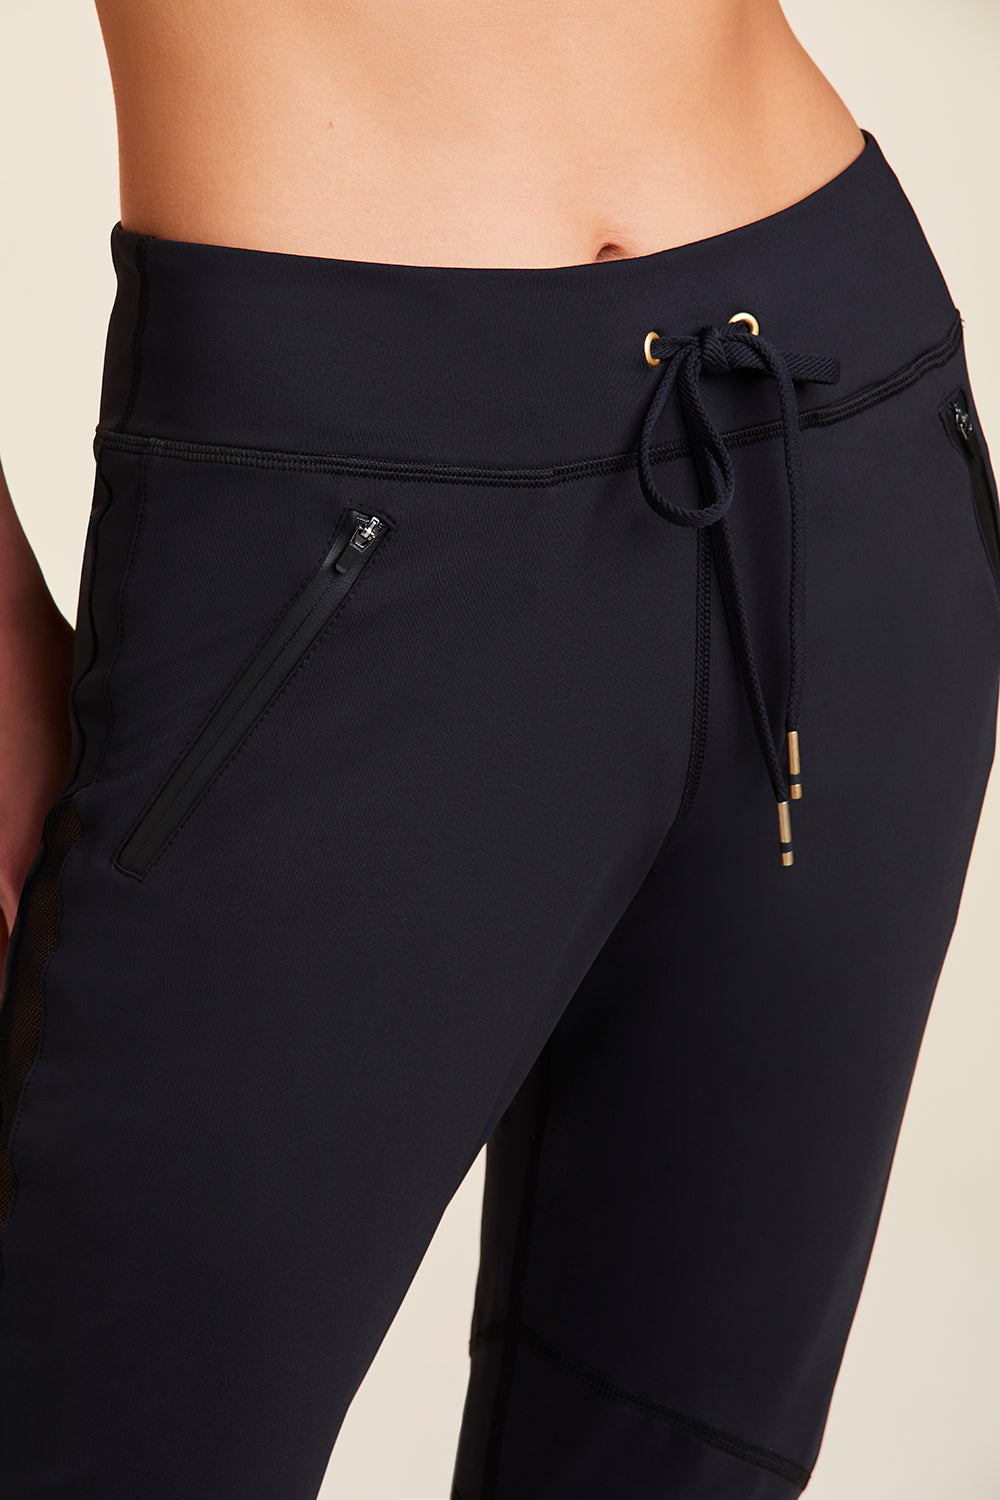 Front view close-up of Alala Women's Luxury Athleisure black sweatpant with sheer mesh side panel